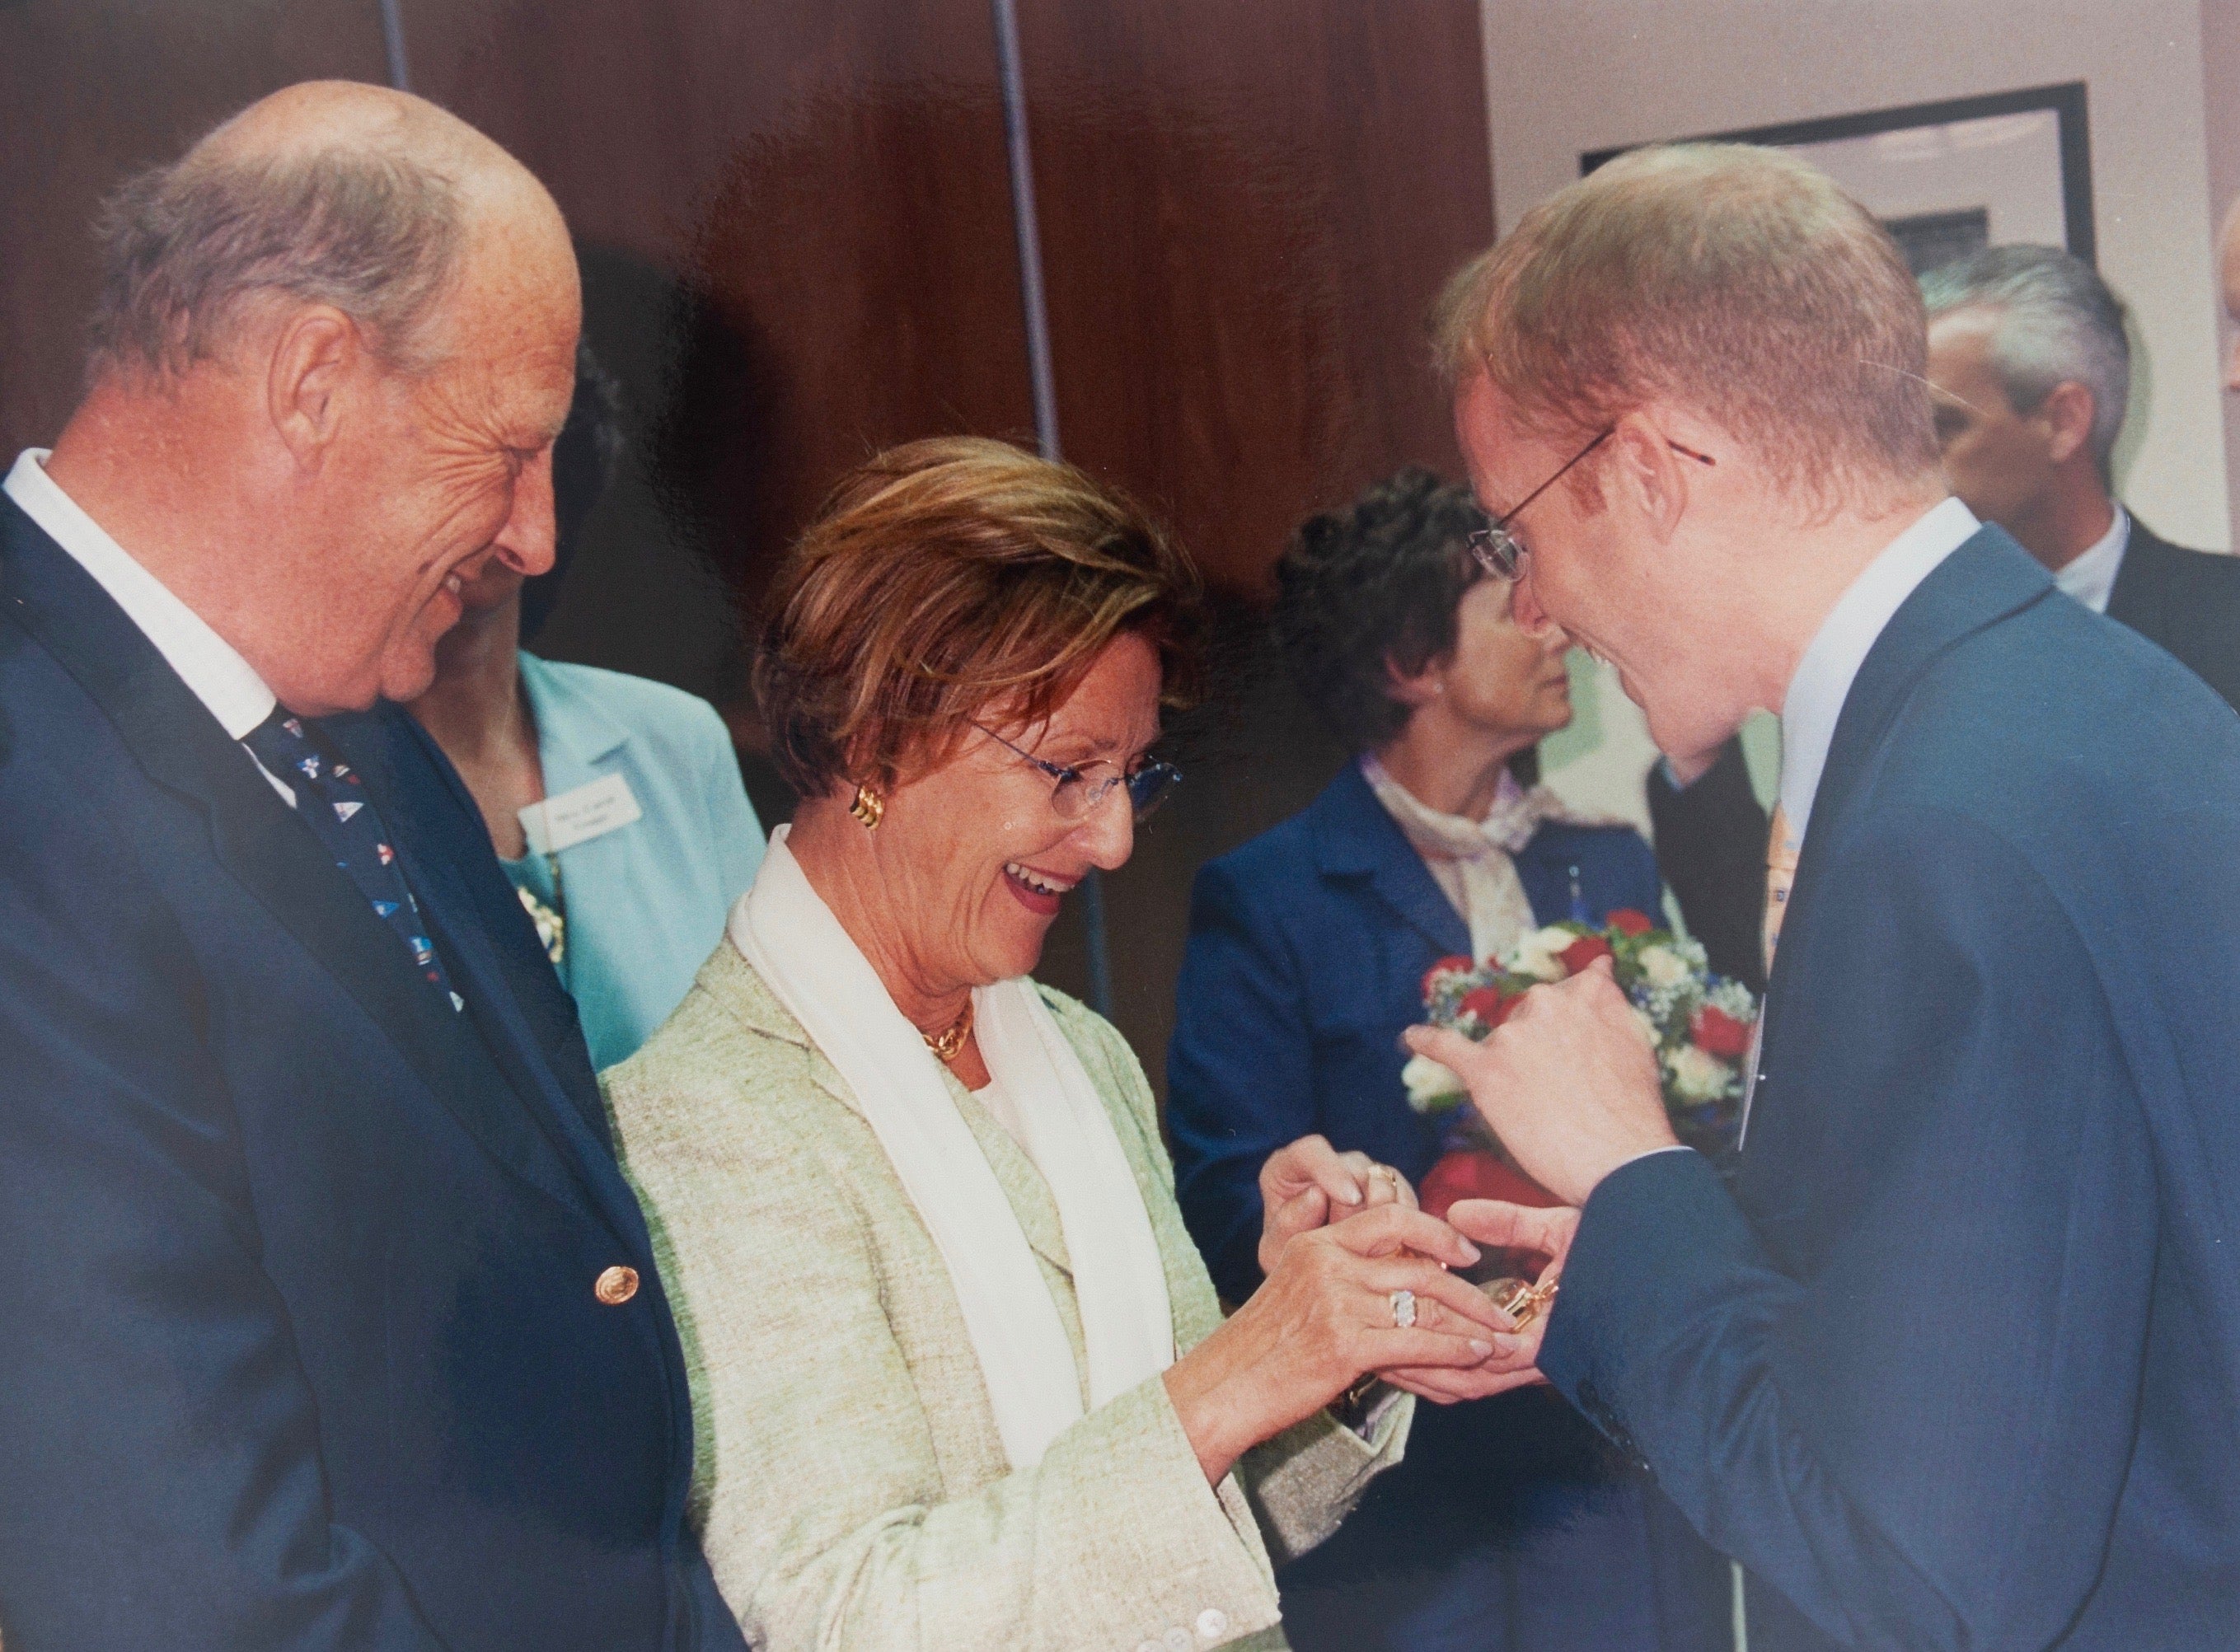 Roger W. Smith watchmaker showing the King and Queen of Norway a watch on their visit to the Isle of Man for A Collected Man London